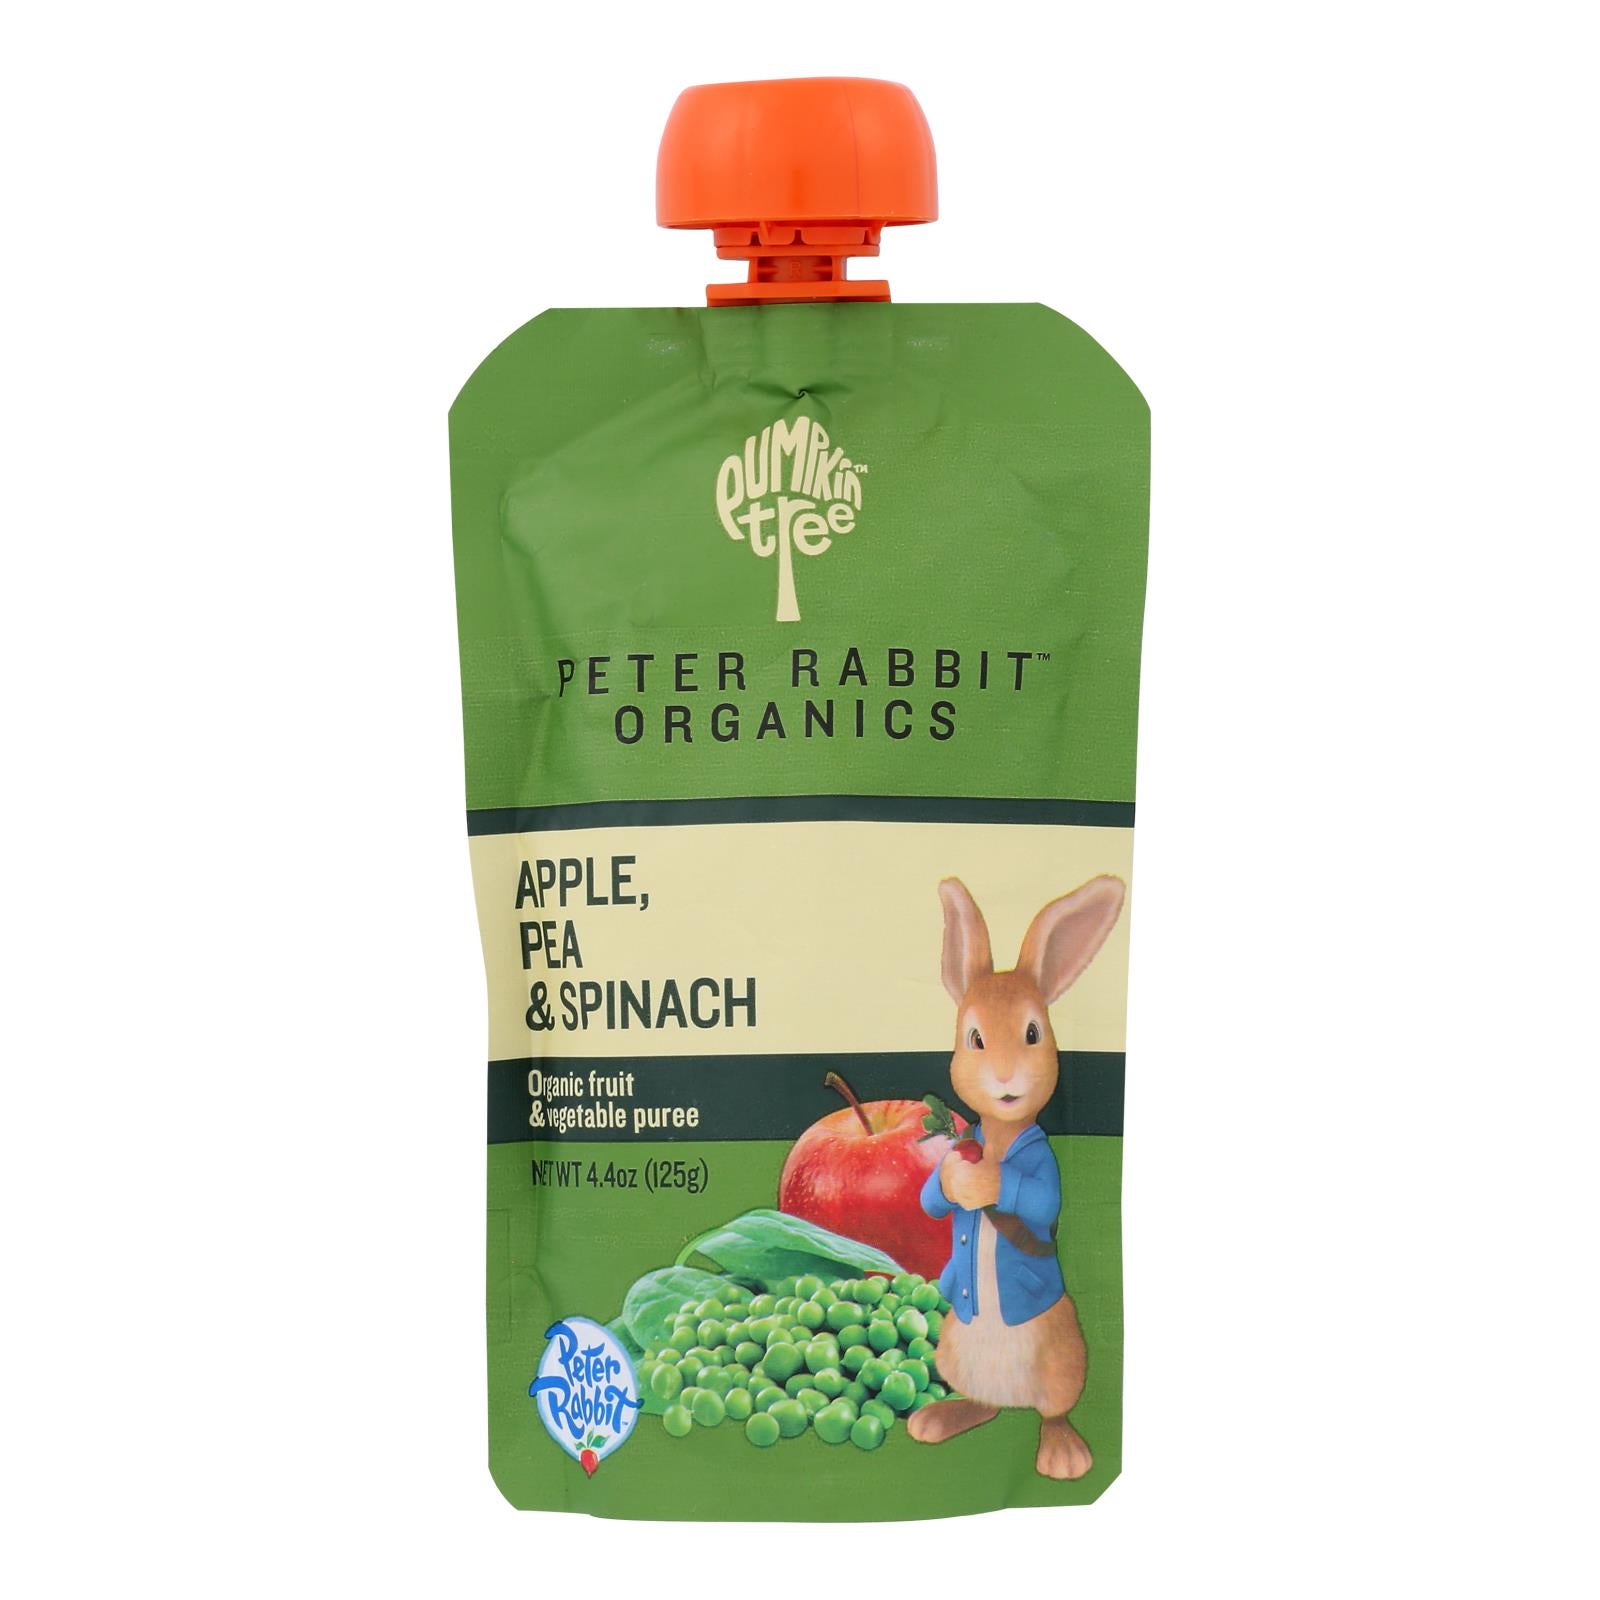 Peter Rabbit Organics Veggie Snacks - Pea Spinach And Apple - Case Of 10 - 4.4 Oz. - Whole Green Foods